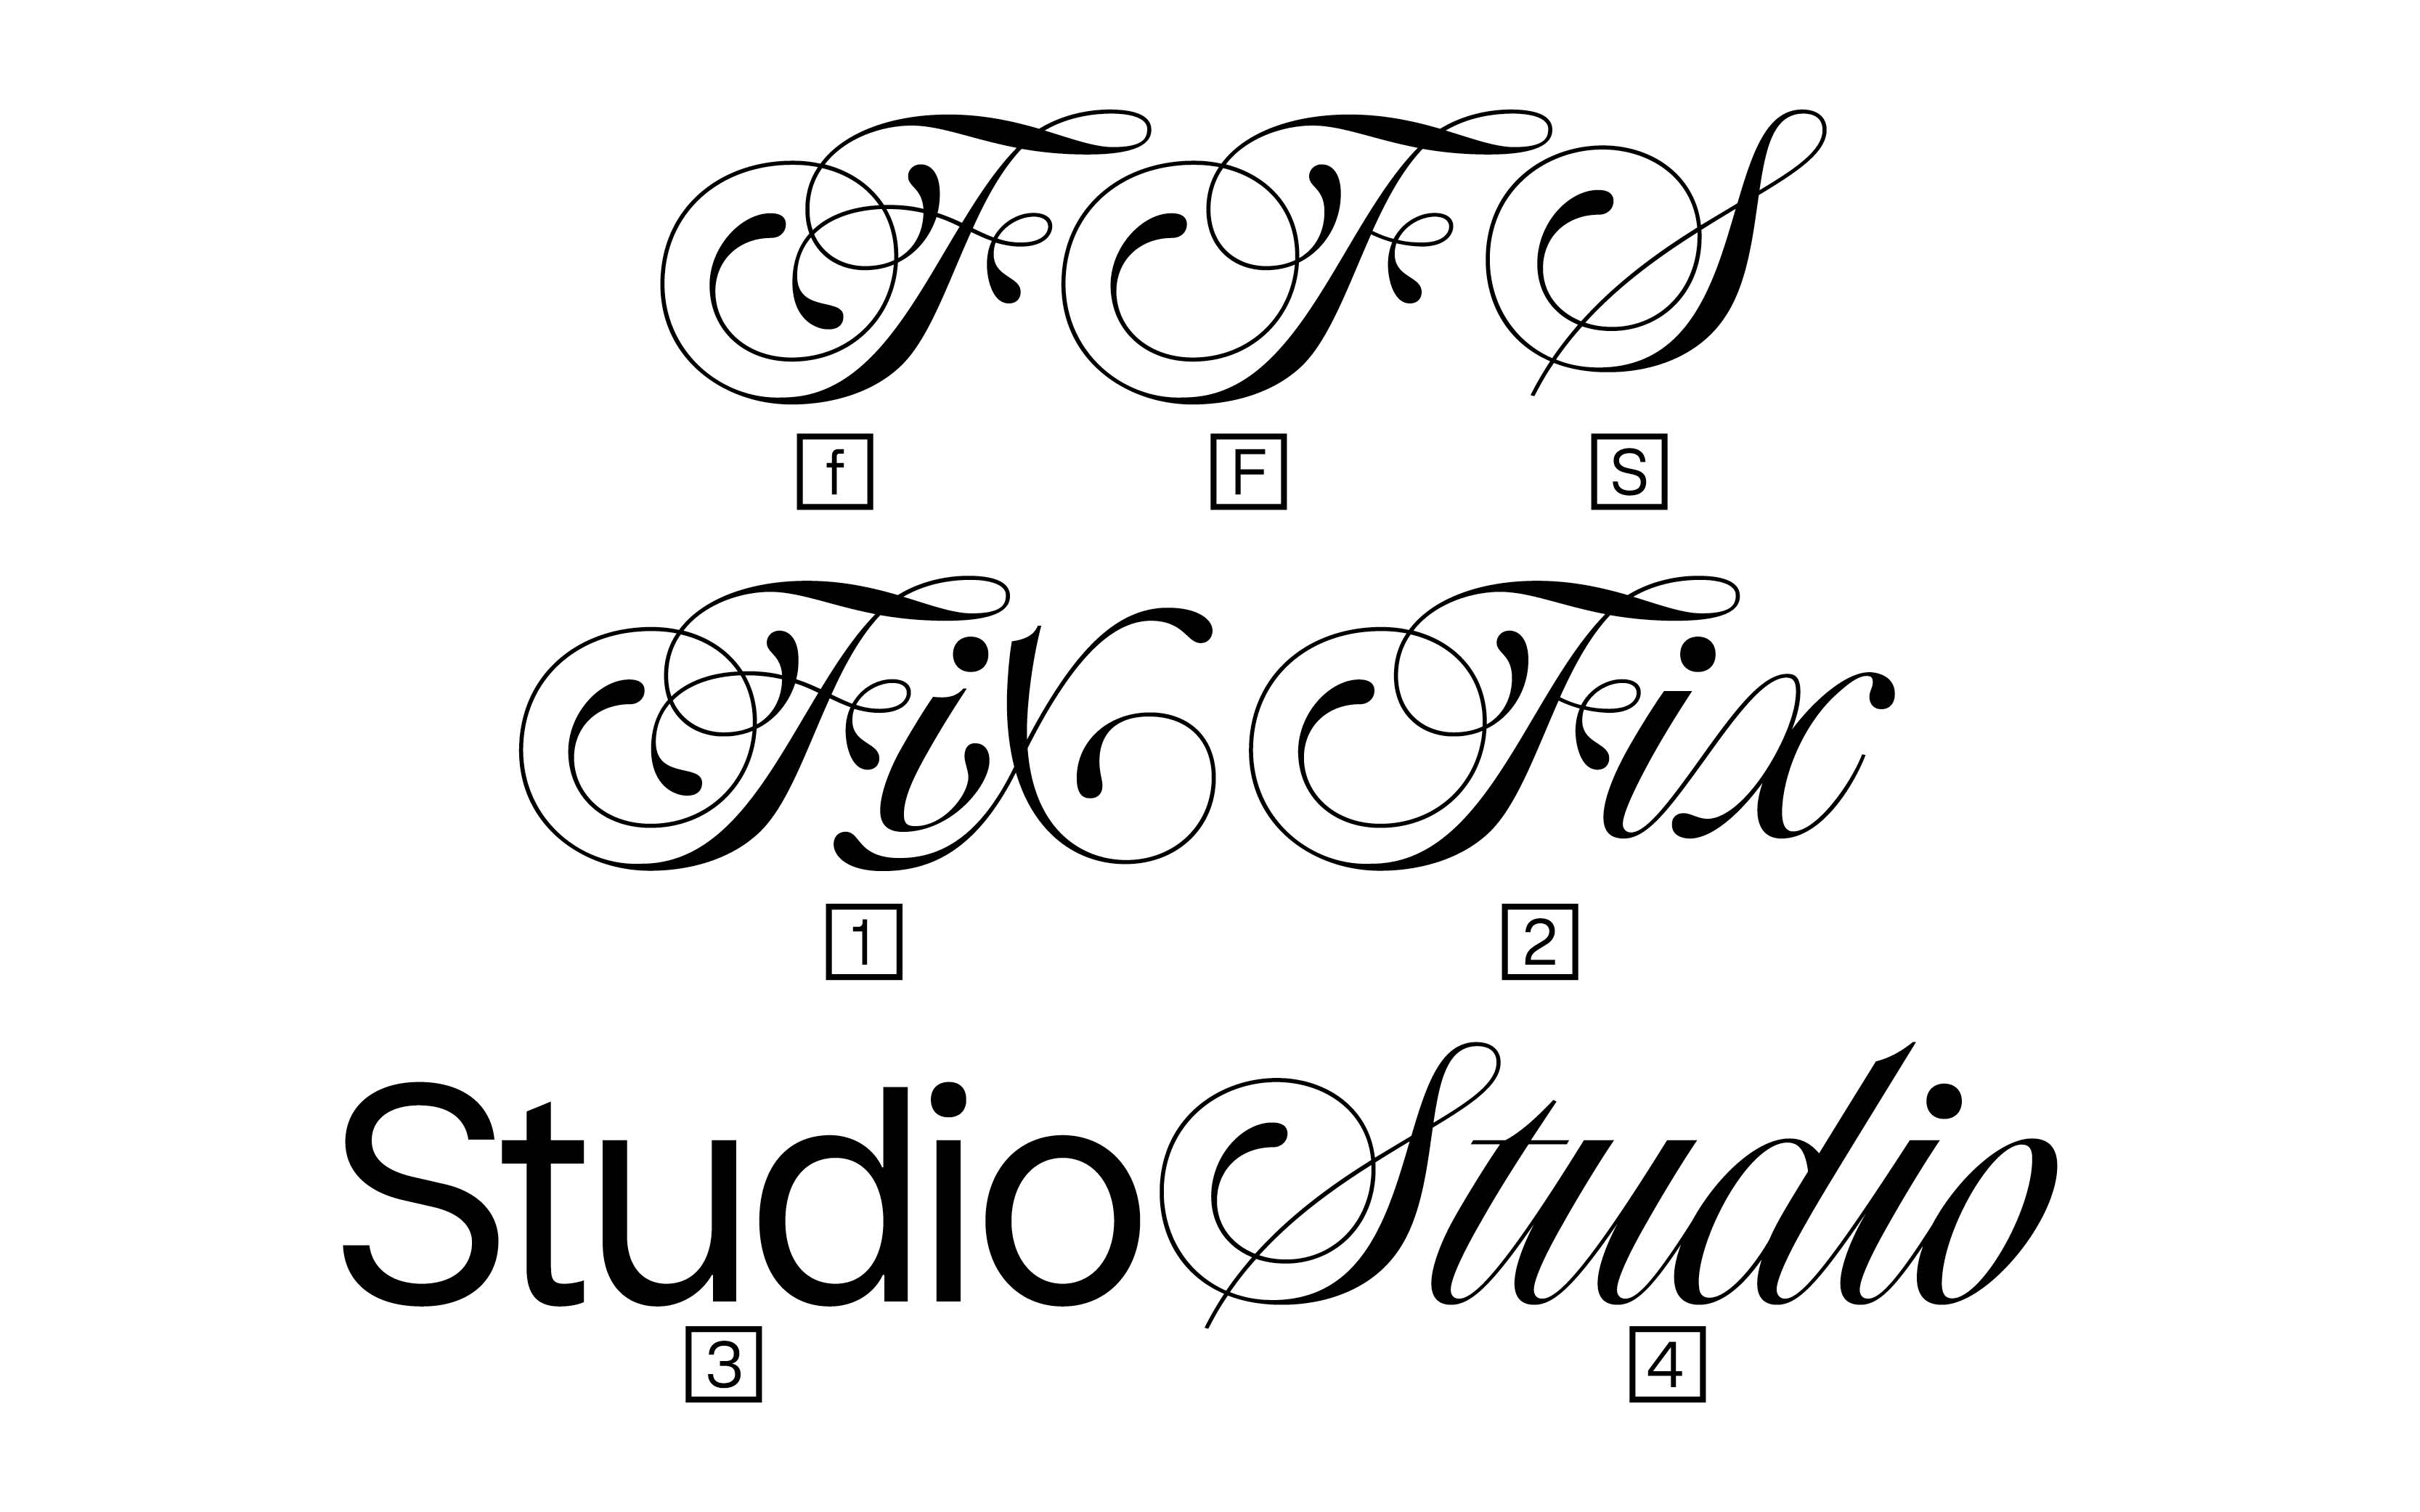 The Variable Font file is the best tool to create variation inside the same logo. To be short, here’s the keys corresponding to the various elements. The designer can combine the initials (ornate or simple F, also S for Studio), the Fix wordmark (ornate FiX or simple Fix), the Studio wordmark (in sans serif or in Spencerian Script).